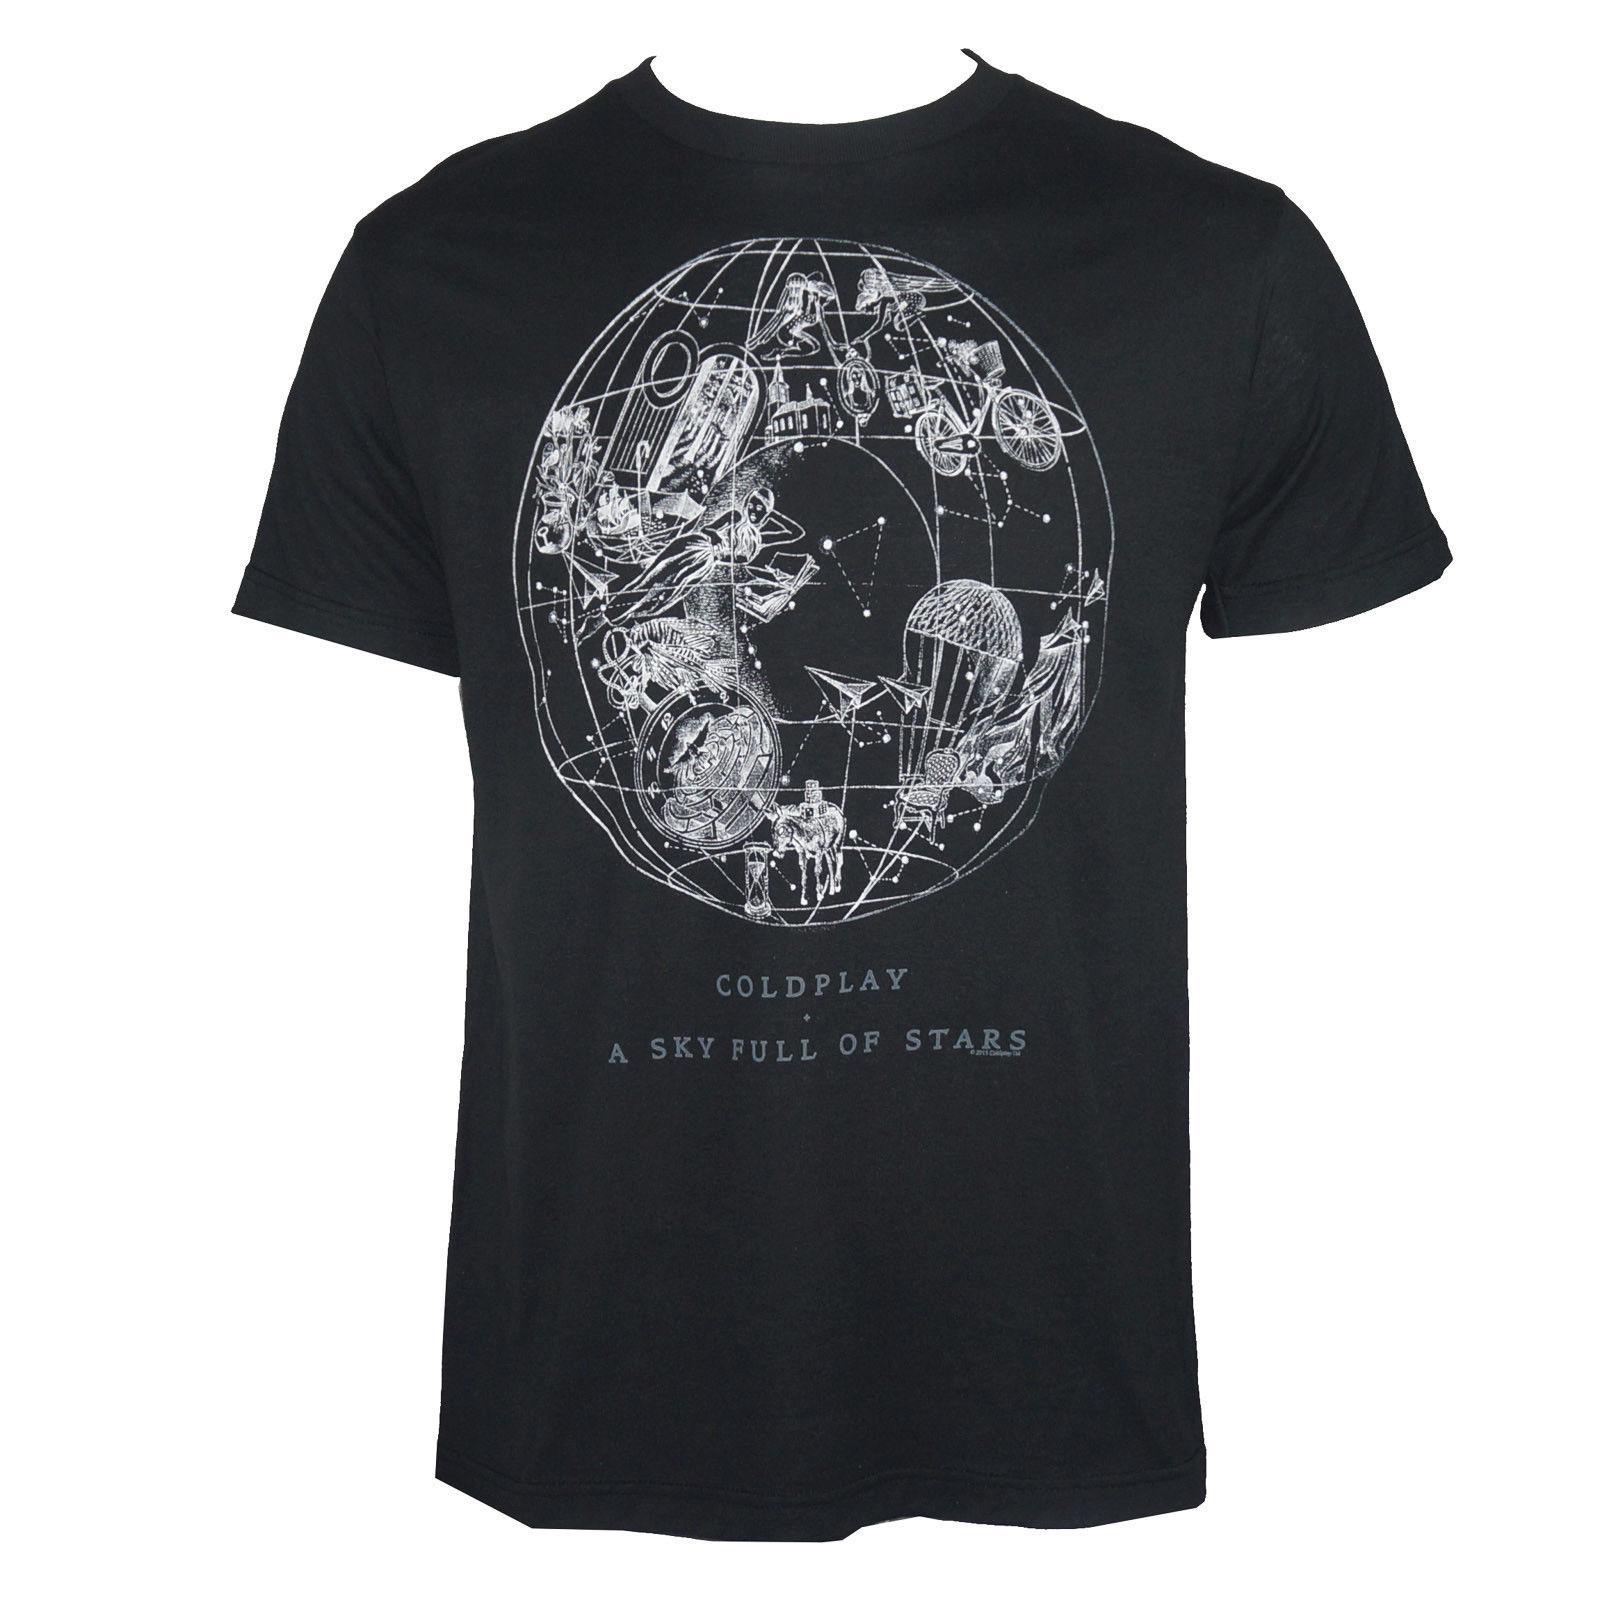 Coldplay Black and White Logo - Authentic COLDPLAY Sky Full Of Stars Logo Black T Shirt S 2XL NEW